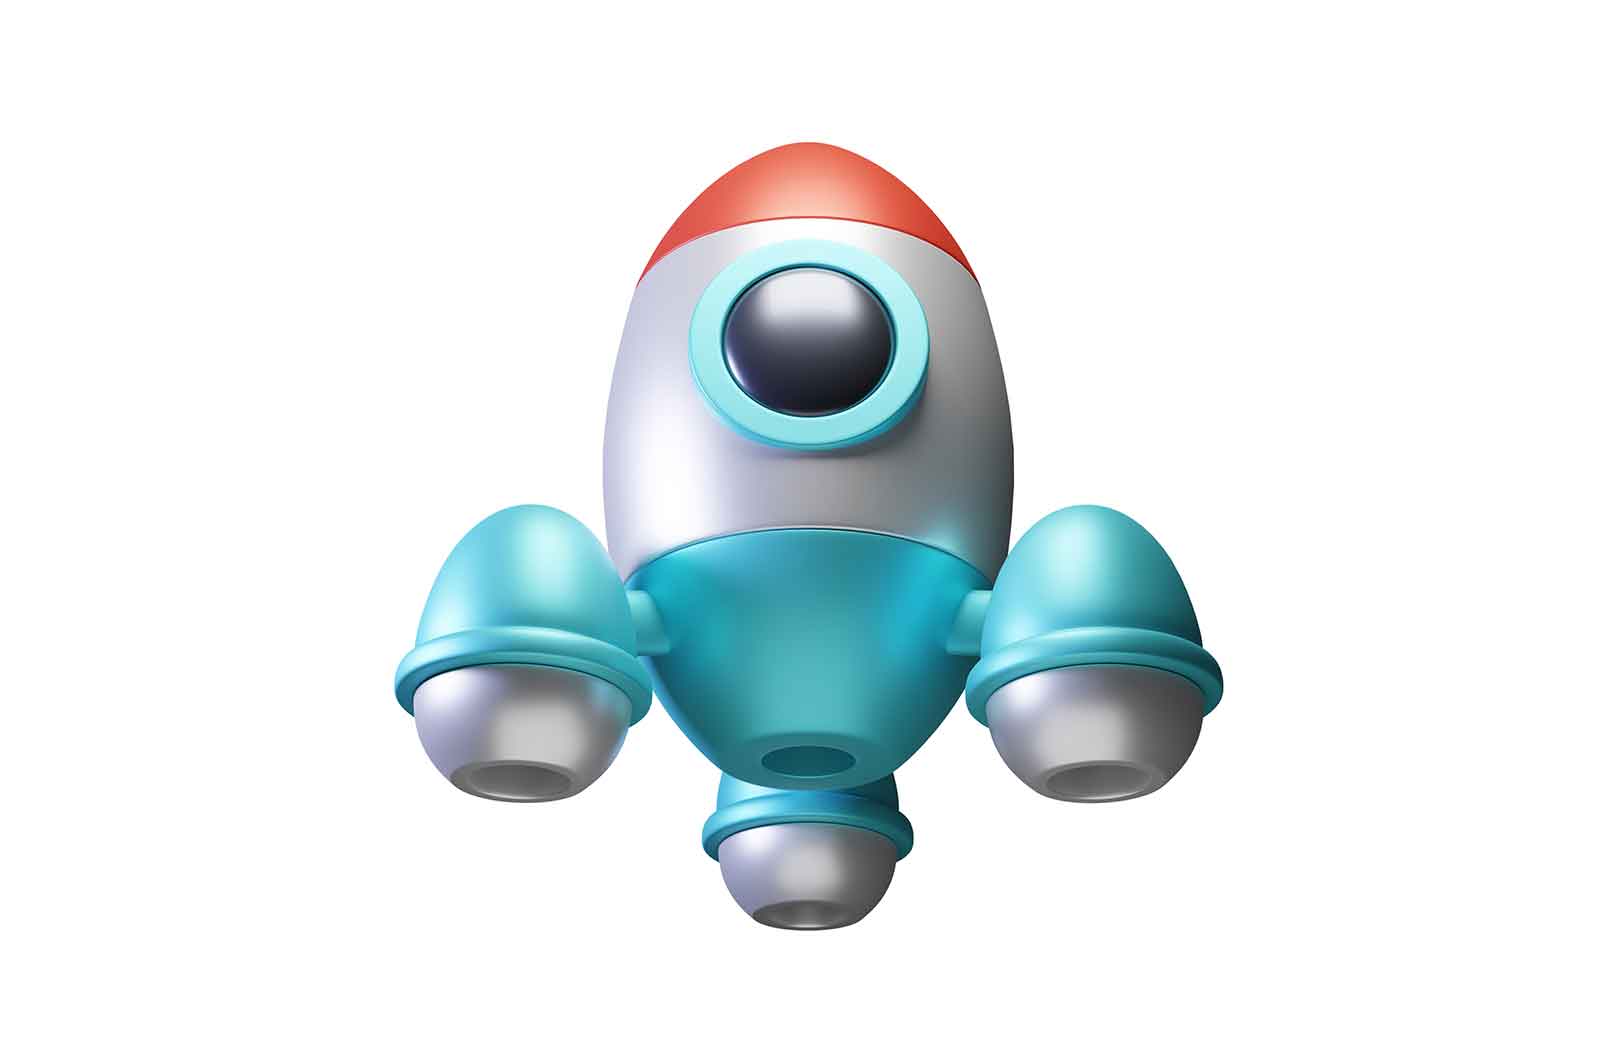 Rocket launch icon, start-up of new project 3D illustration. Spaceship, rocketship 3d isometric. Business development concept